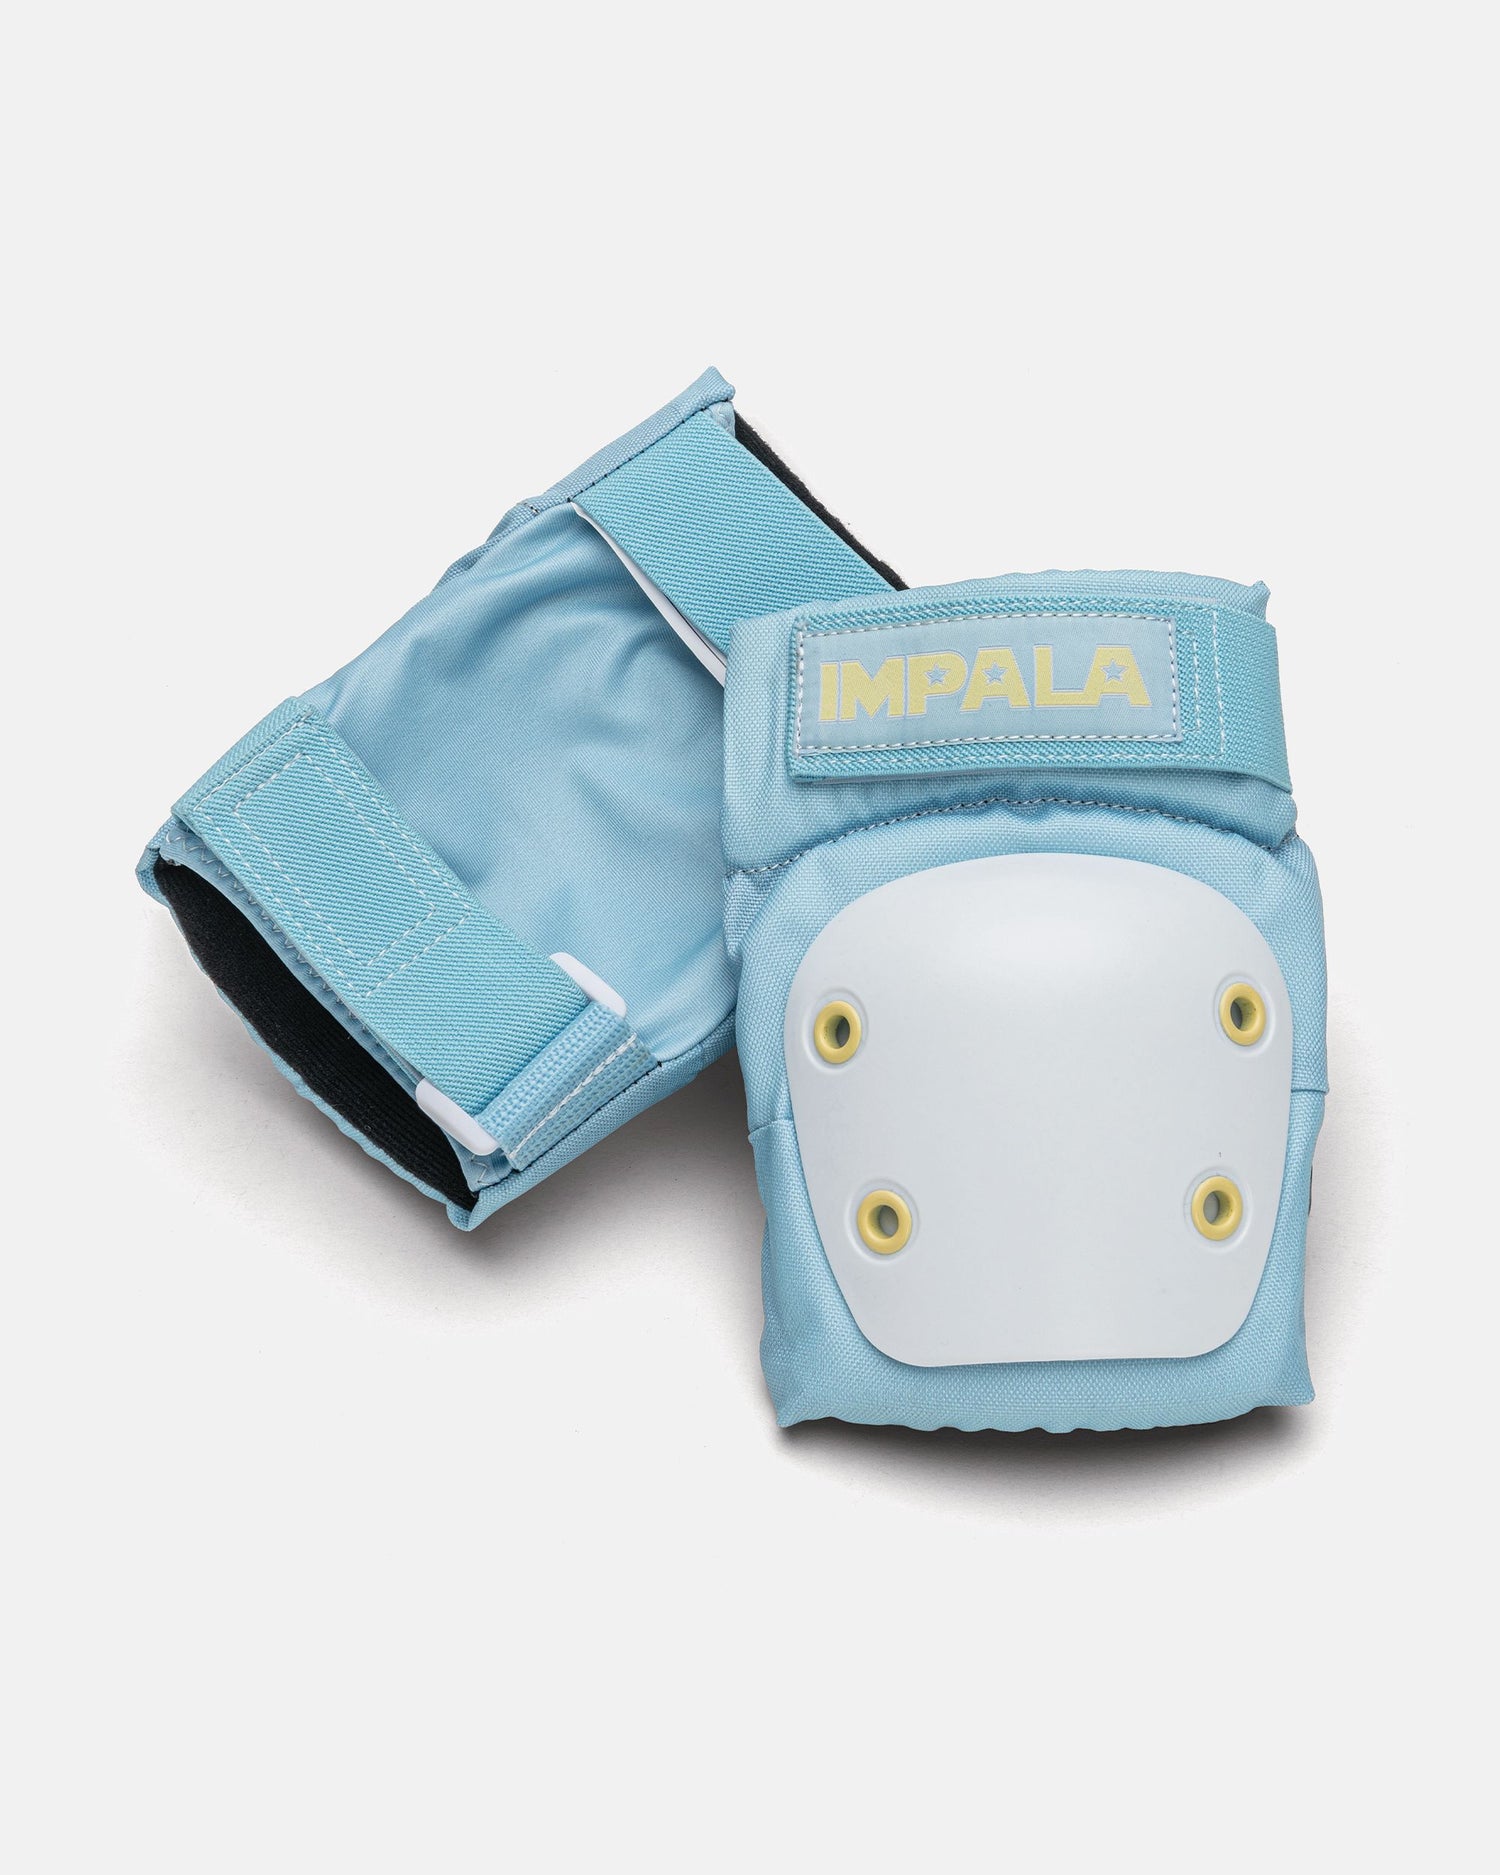 Elbow pads in the Impala Protective Set - Sky Blue/Yellow